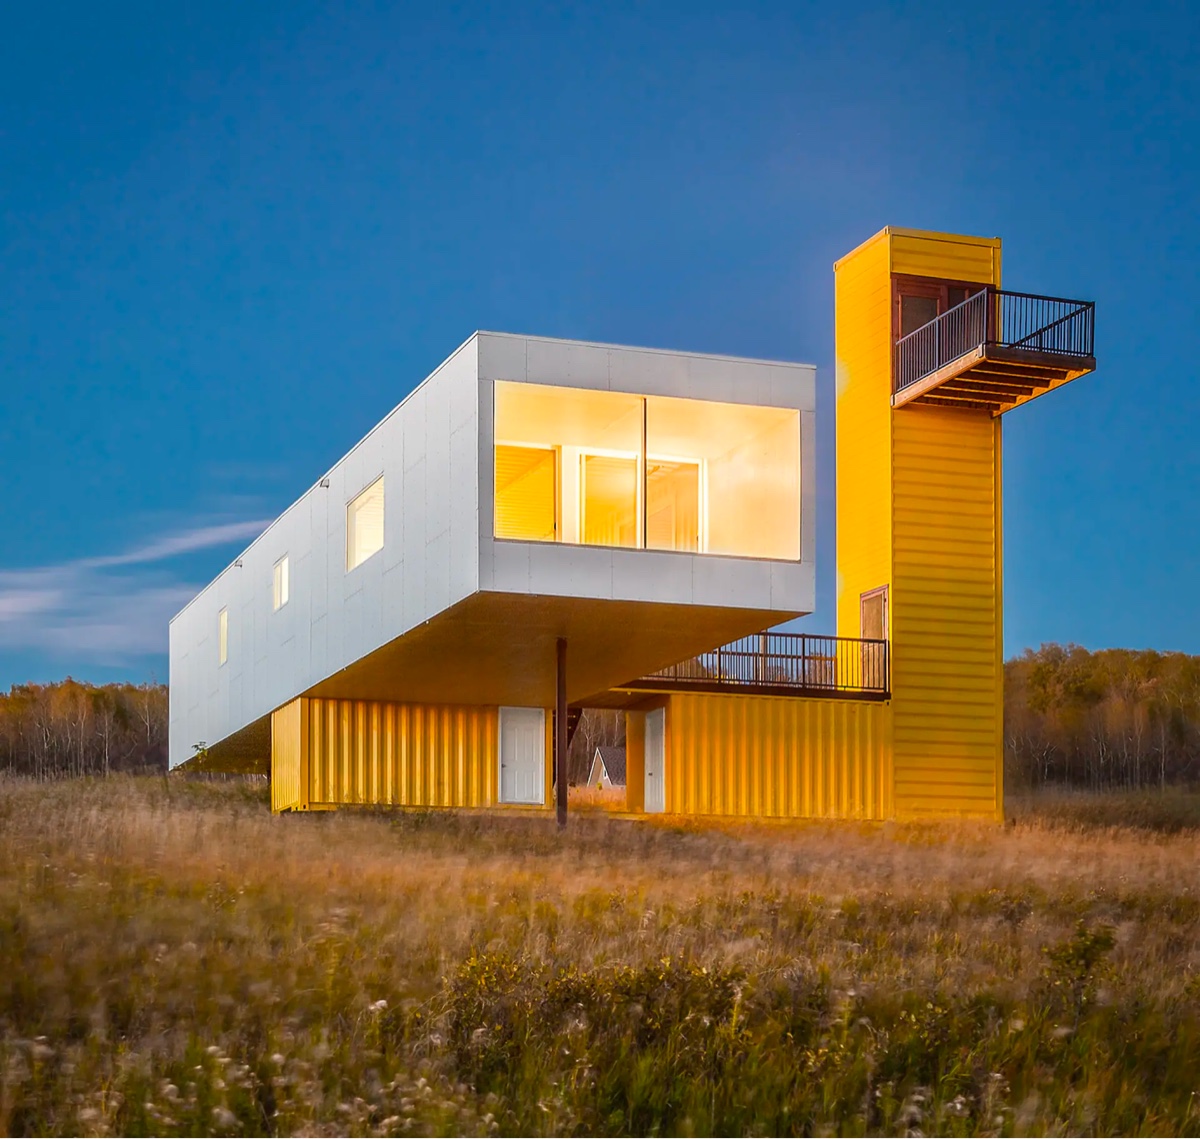 51 Shipping Container Homes That Will Change How You Think About Home Design